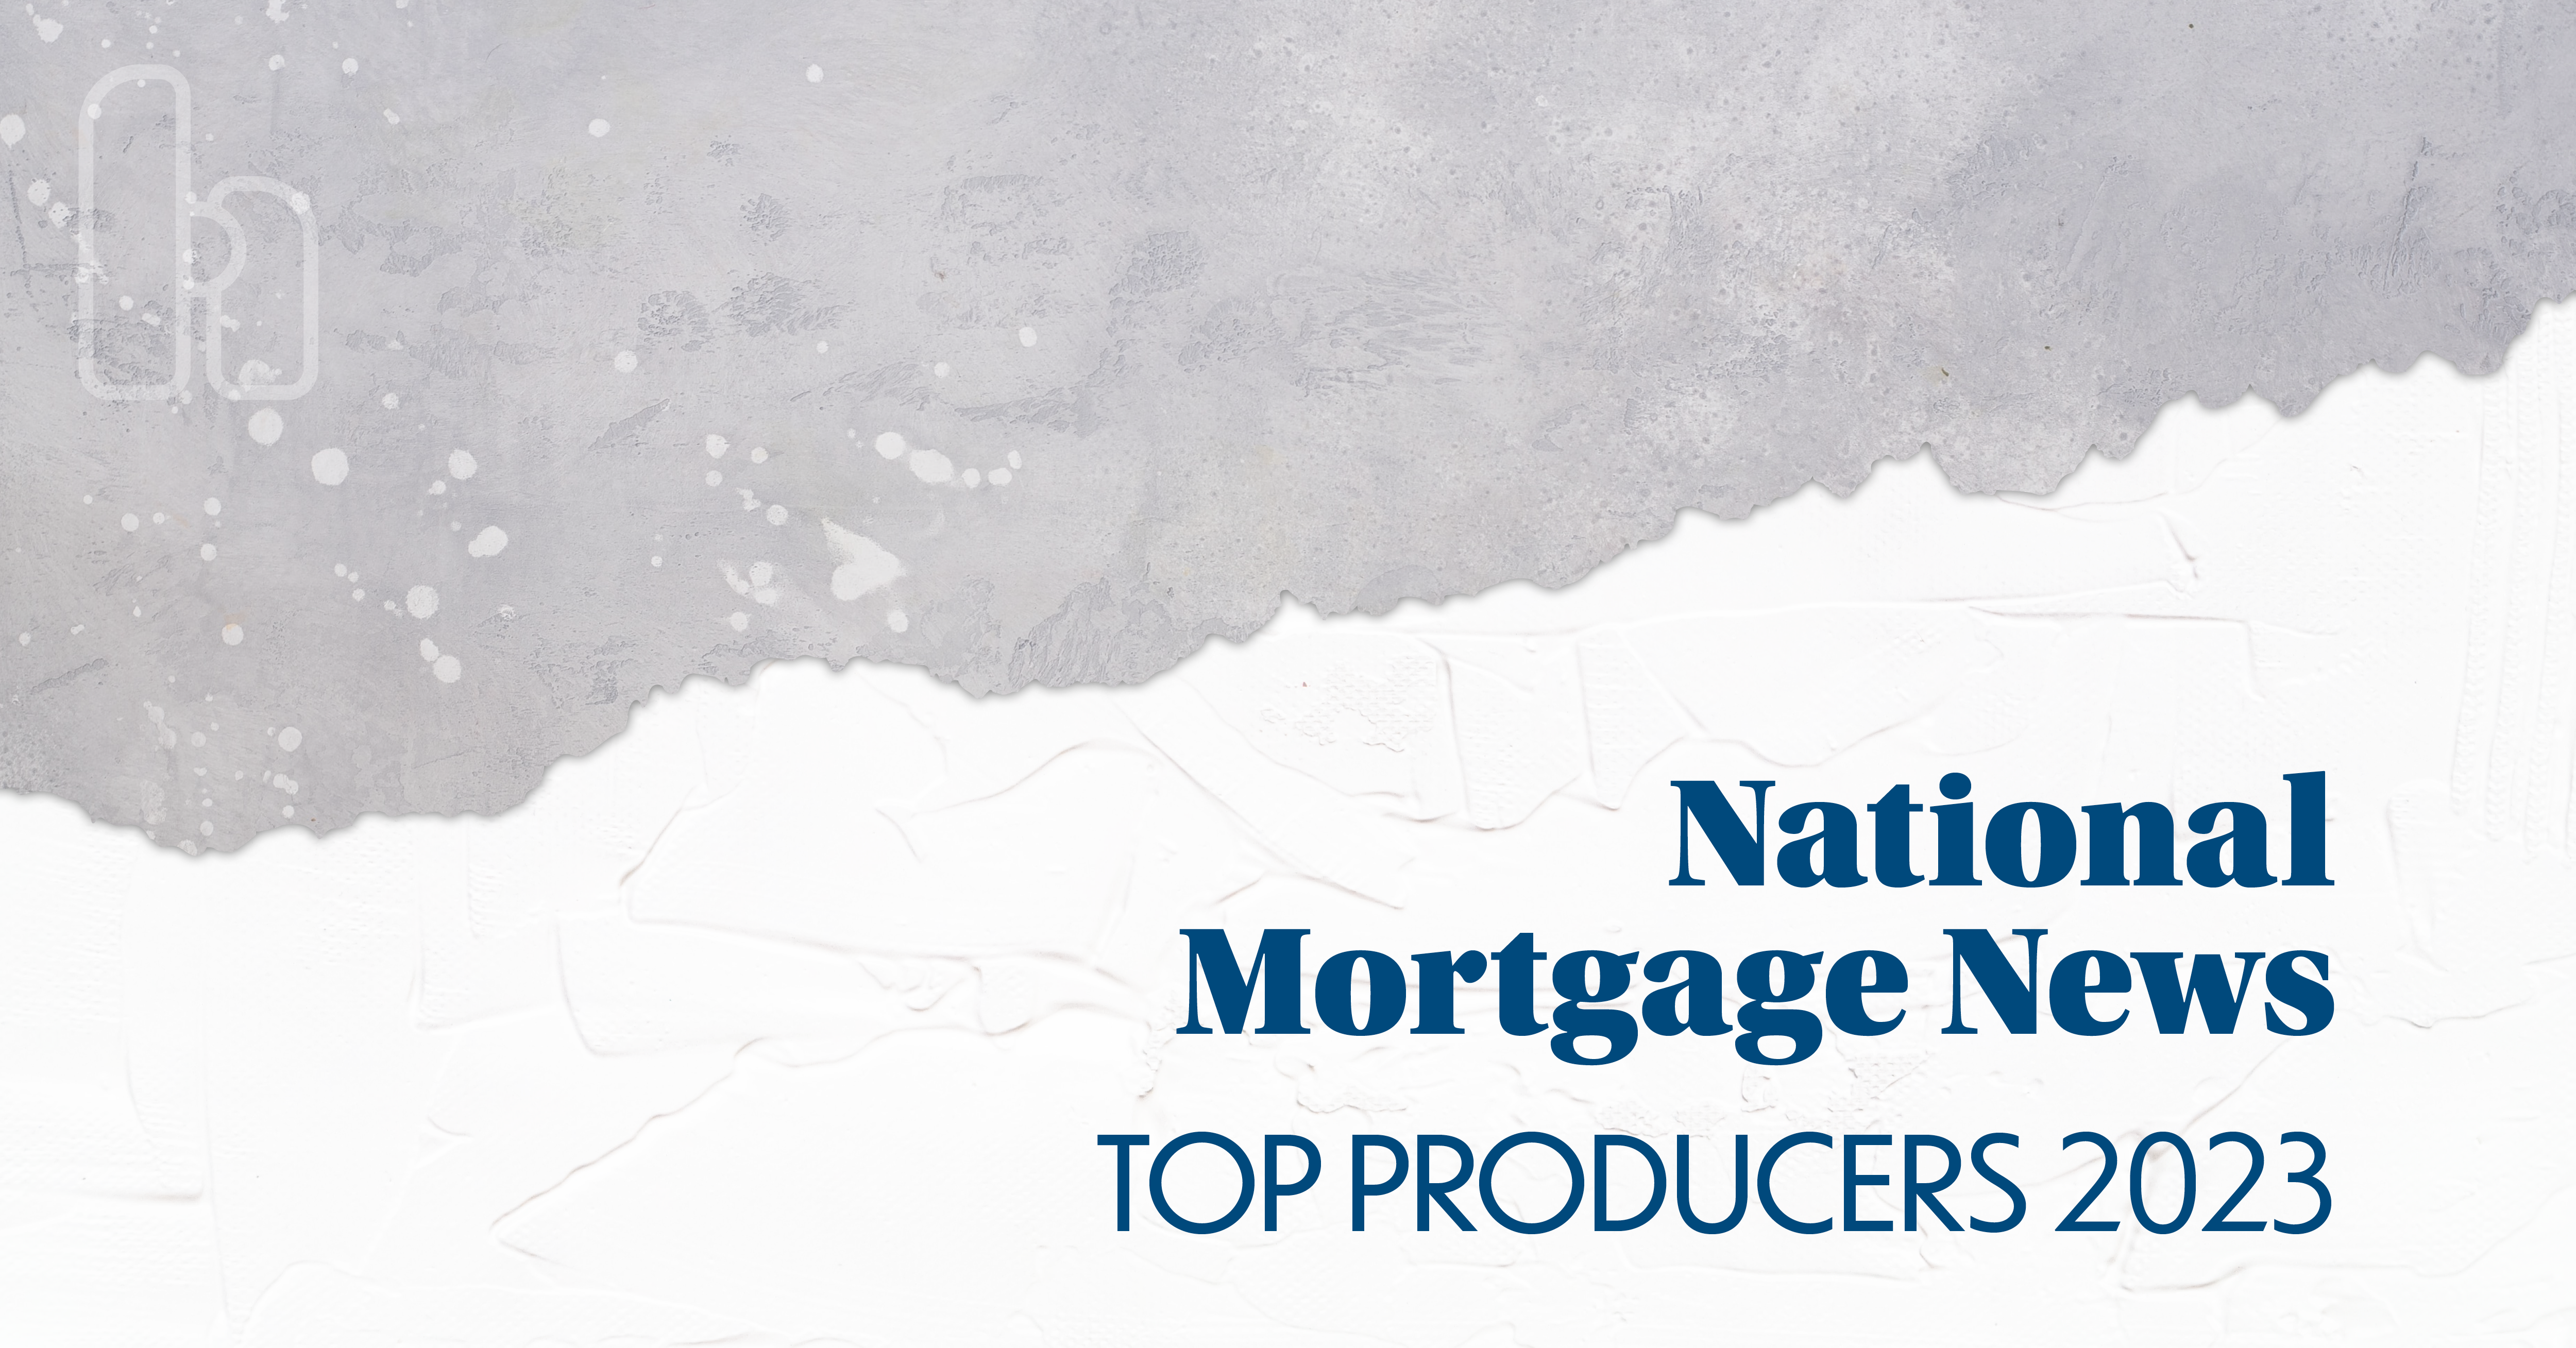 Eight Homeowners Licensed Mortgage Professionals Named 2023 Top Producers by National Mortgage News